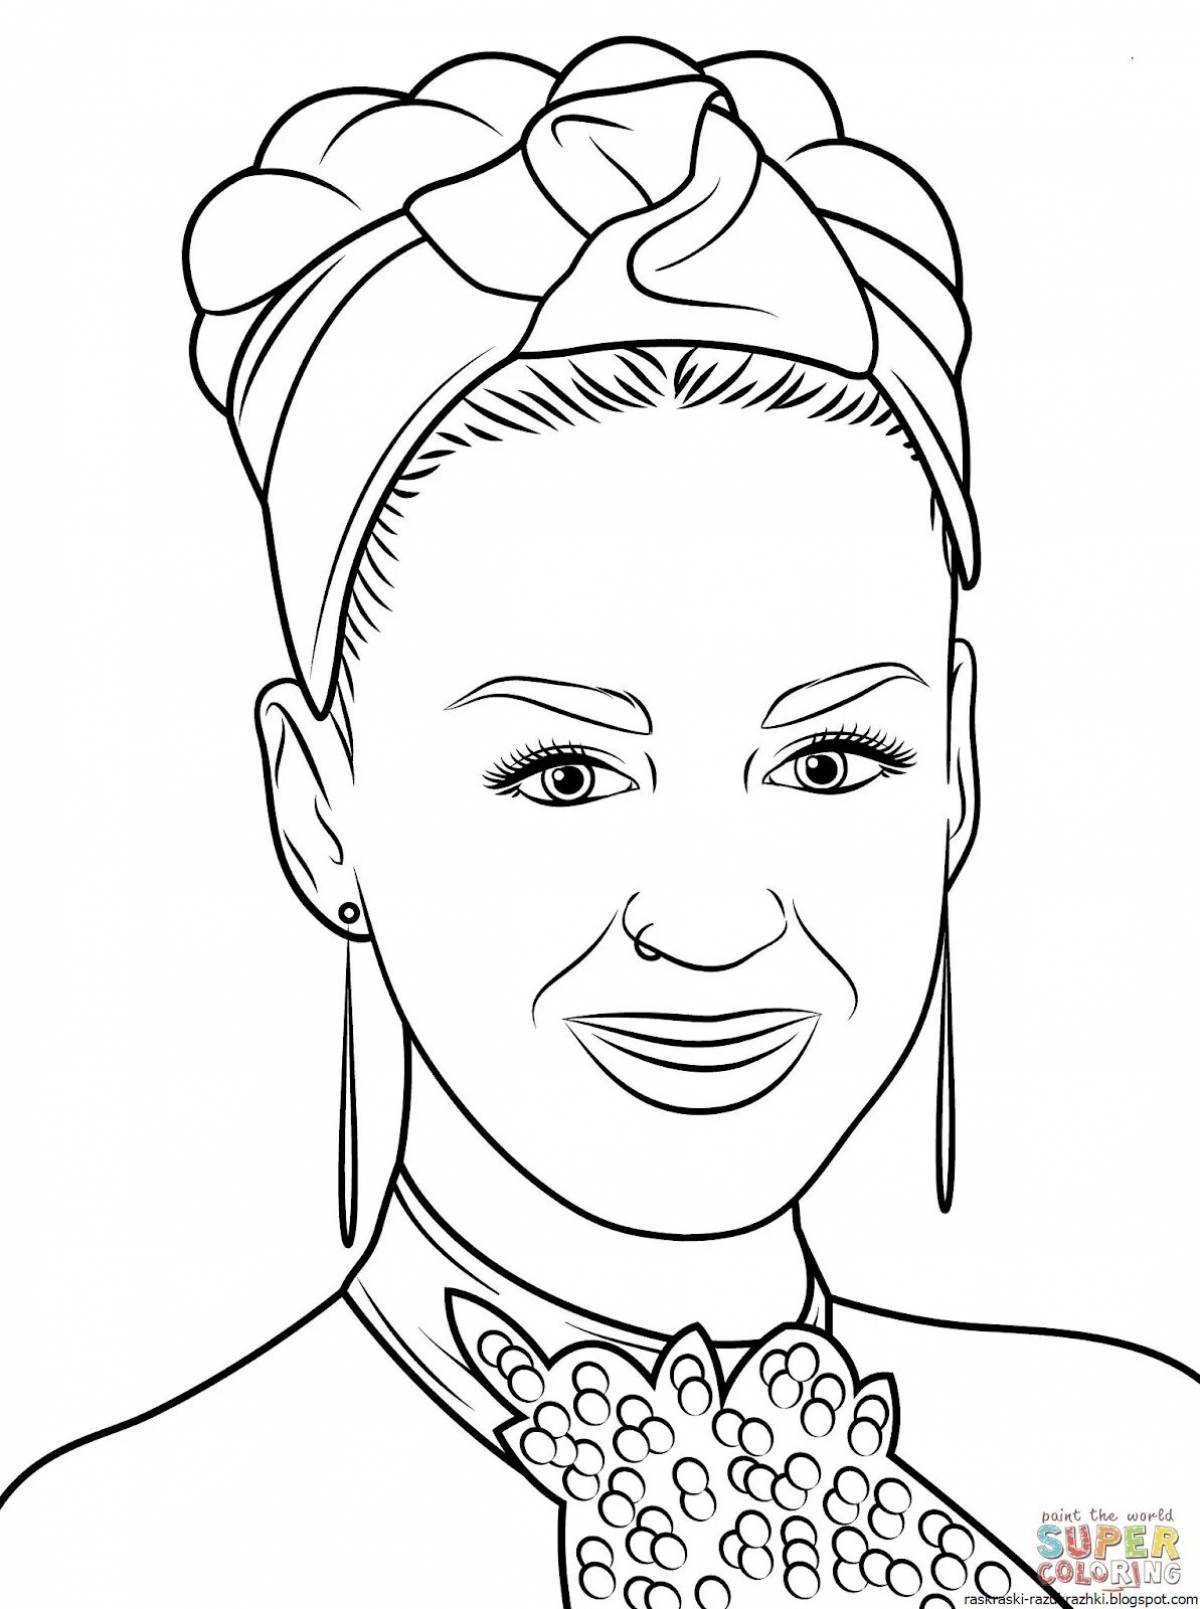 Celeb friendly coloring pages